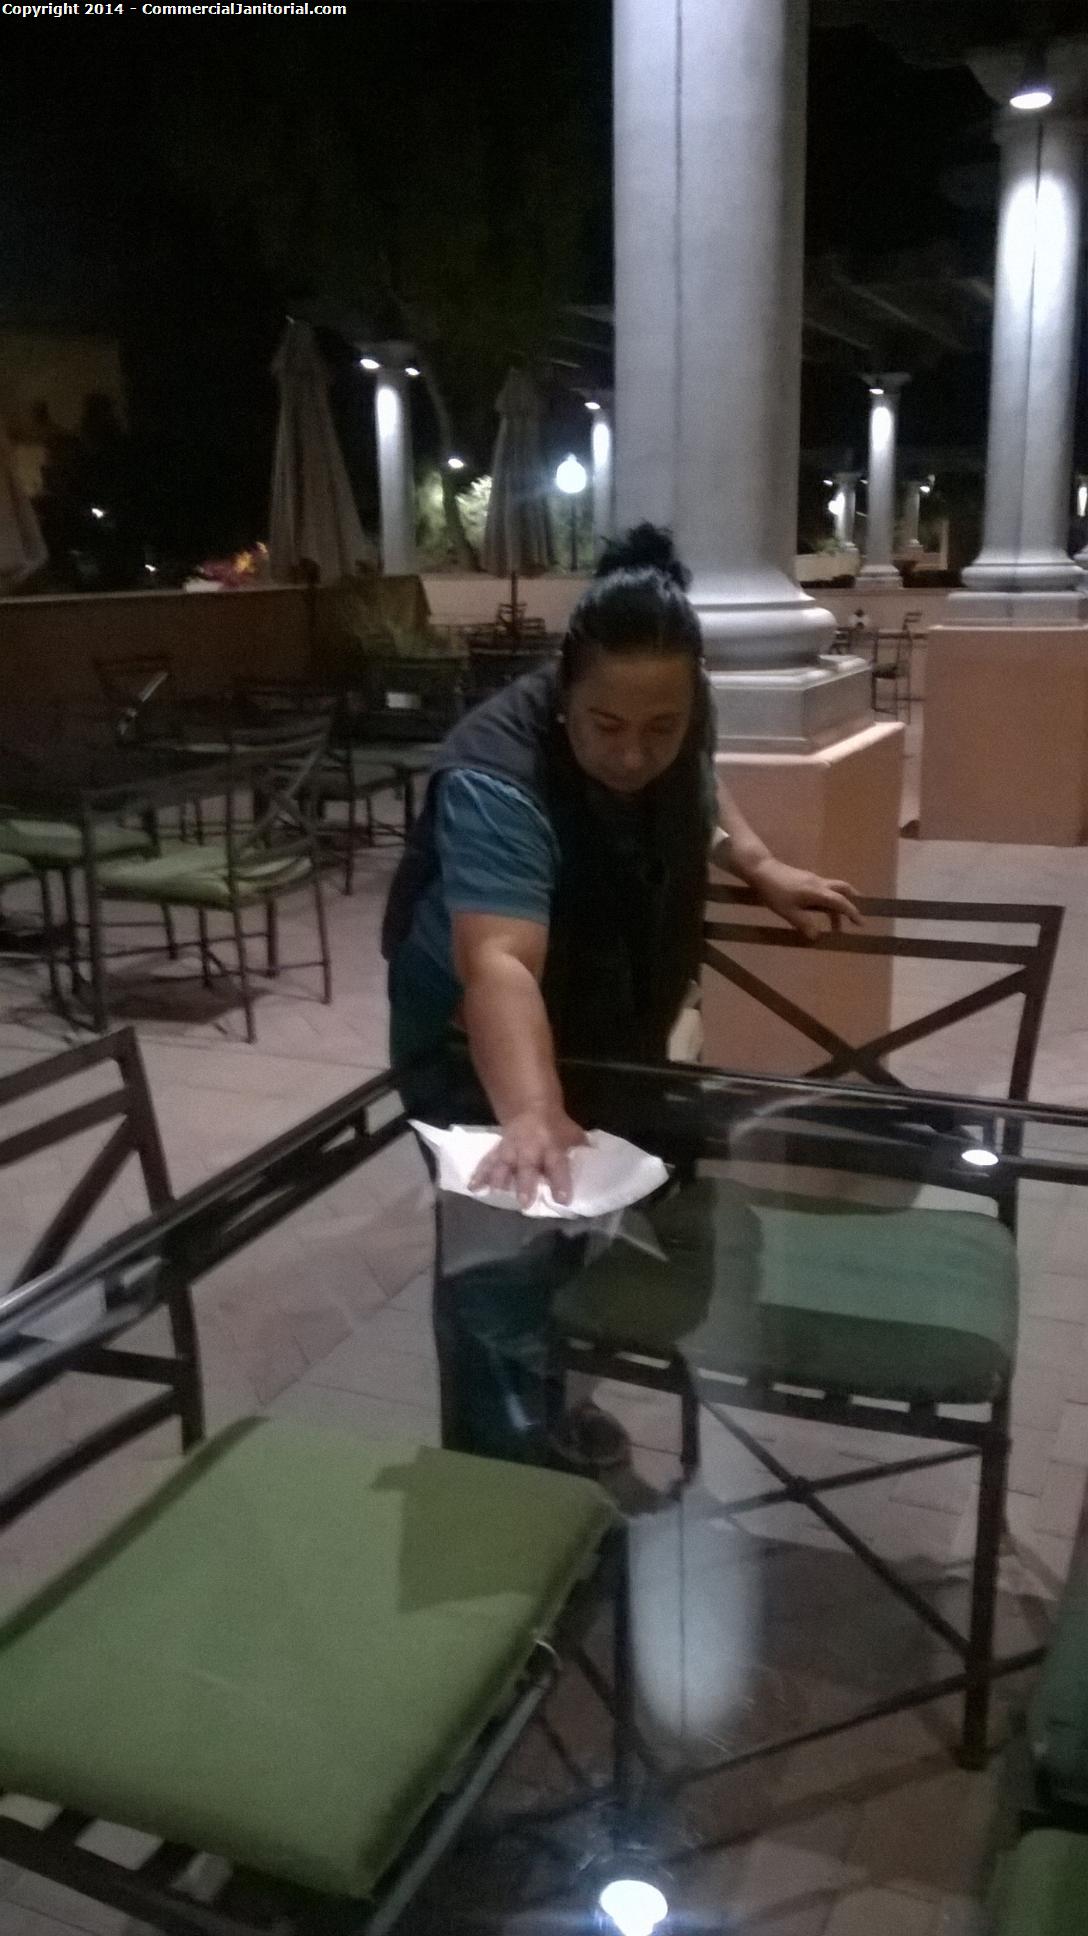 10/27/14

Pedro O. performed inspection

The crew did a great job of wiping down the glass table tops.

The client will be happy.

Nice work team!

Pedro O.

